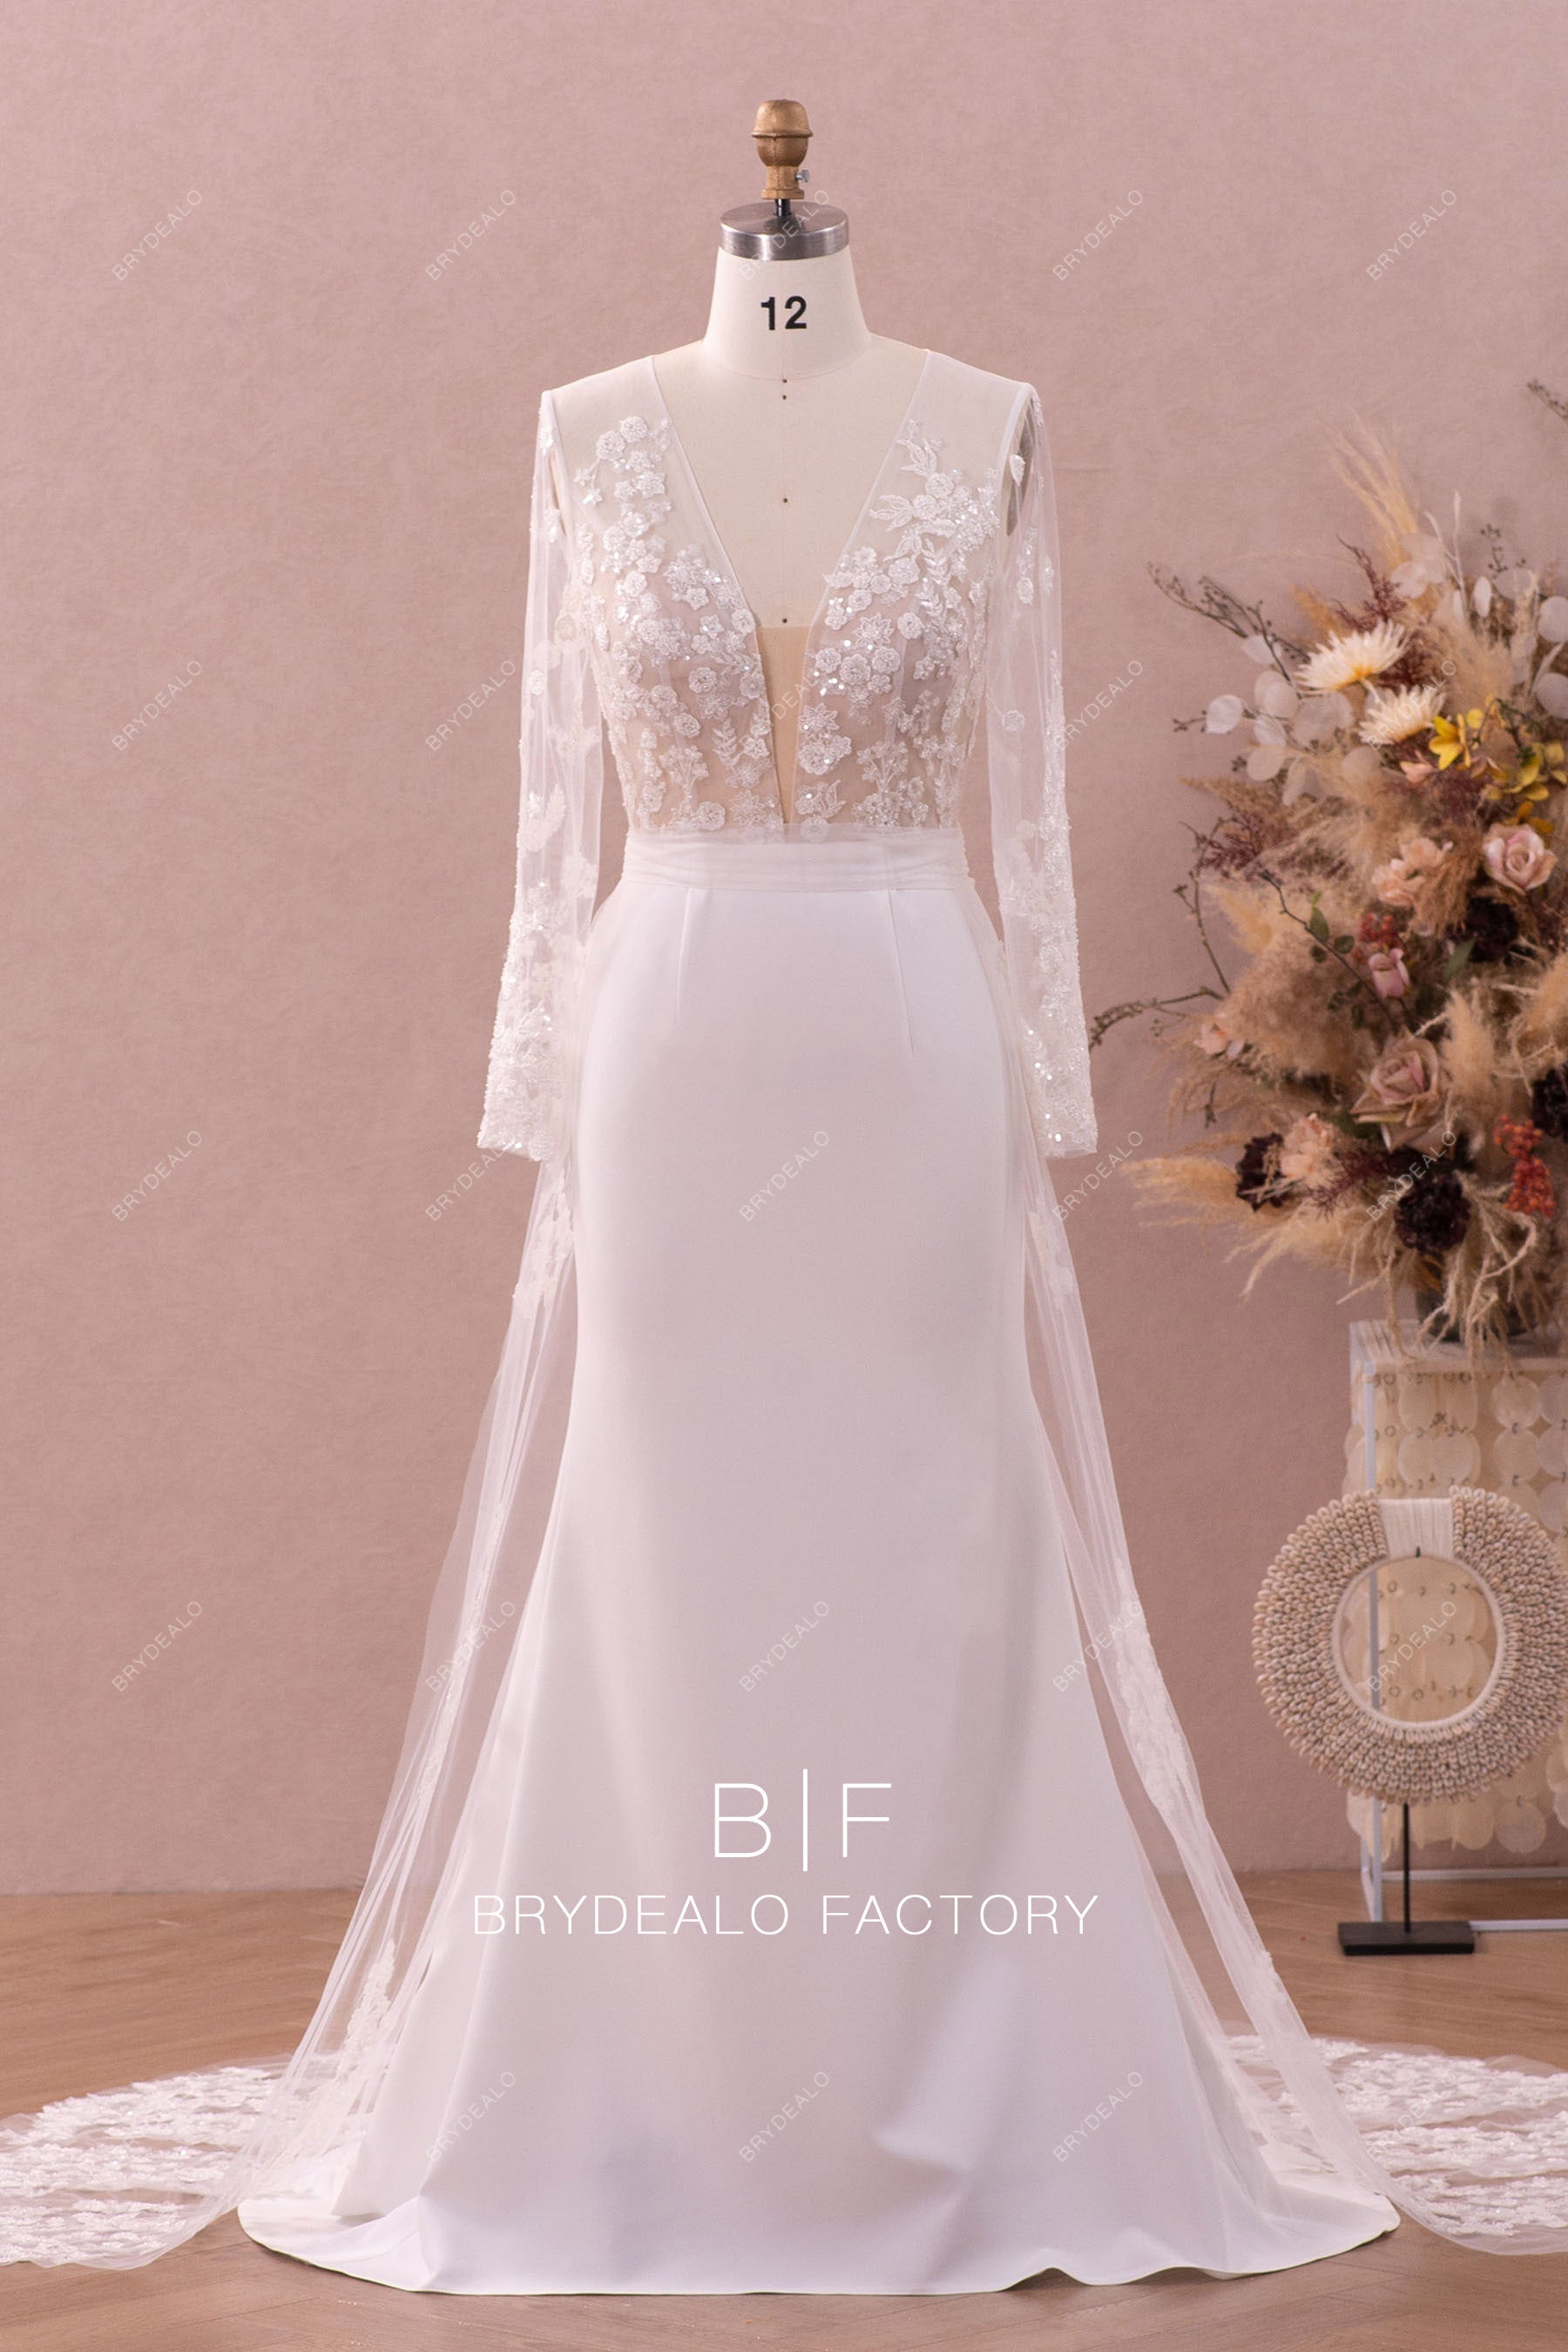 sheer sleeves plunging neck beaded lace crepe bridal gown overskirt